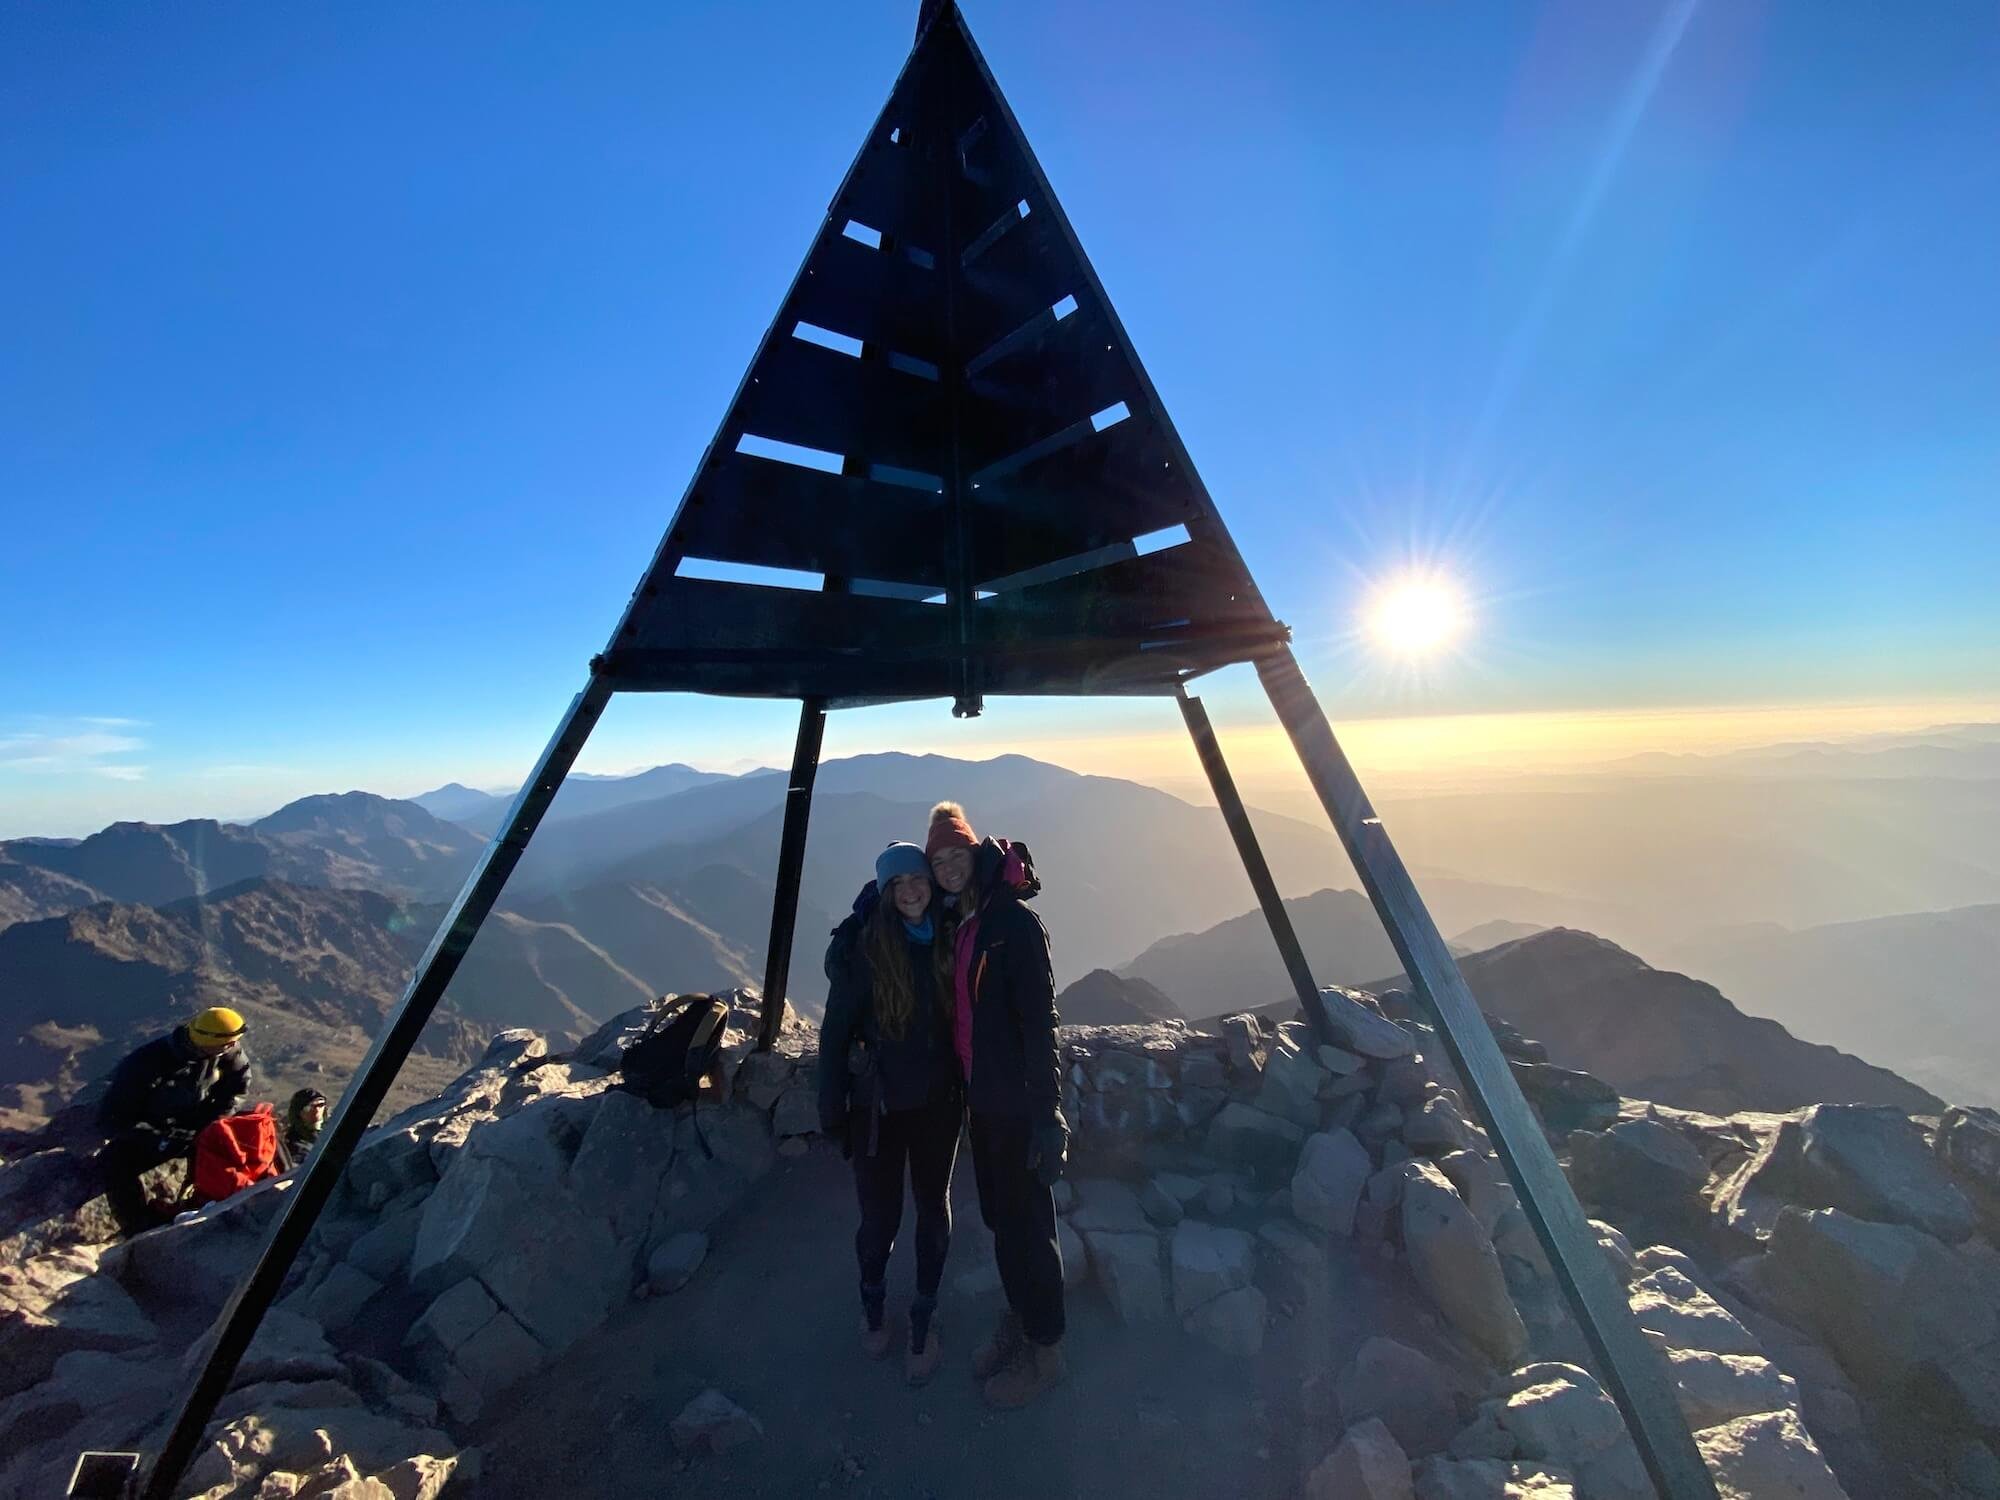  Sam and Kayla on the summit of Mount Toubkal, the highest peak in the Atlas Mountains, Morocco.  13,665 feet / 4,165 metres. Photo: Sam Goldklang. 